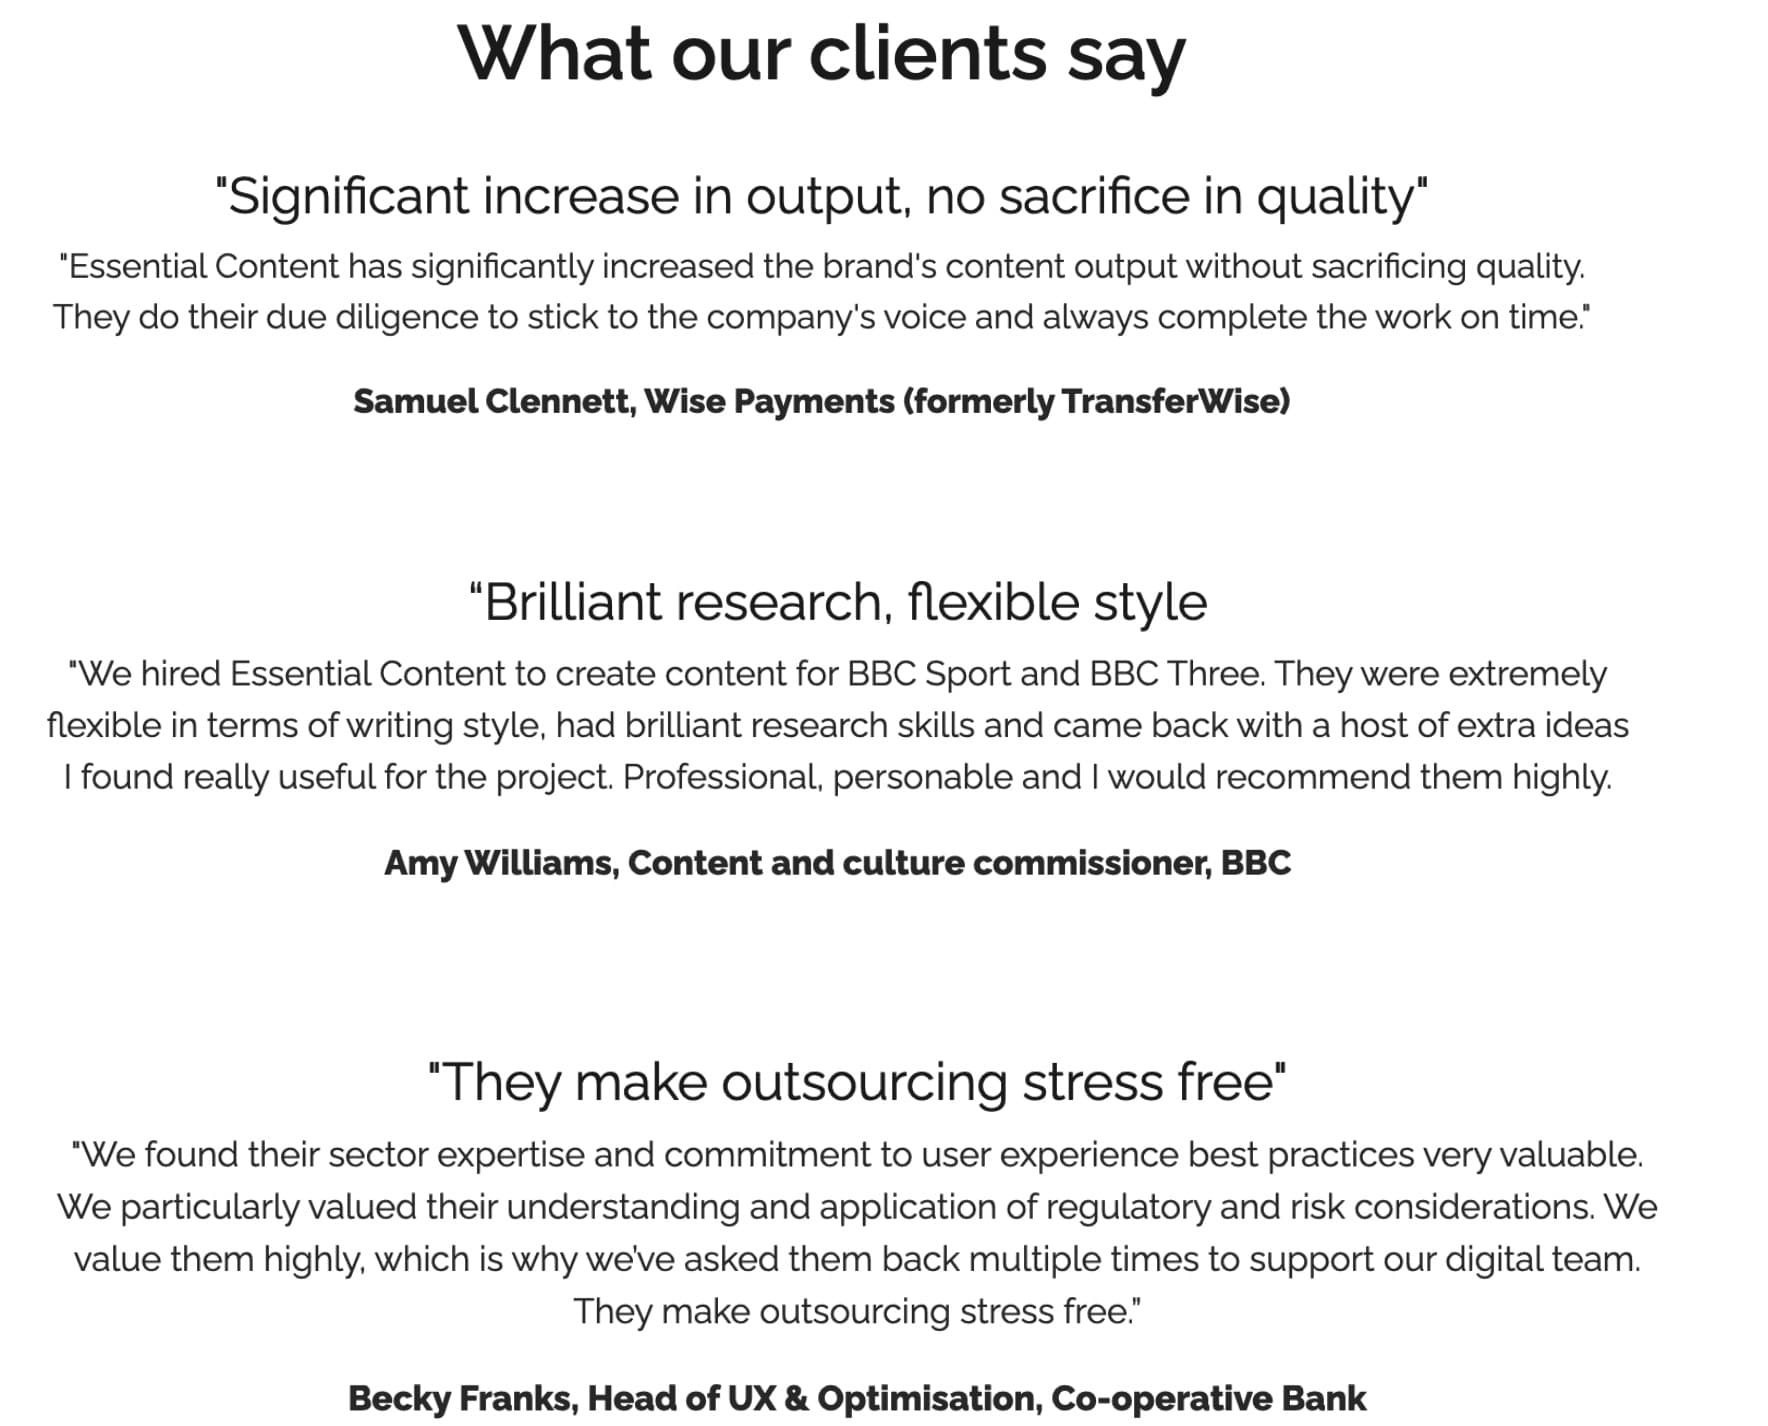 Image showing positive client testimonials from Wise.com, Co-operative Bank and BBC